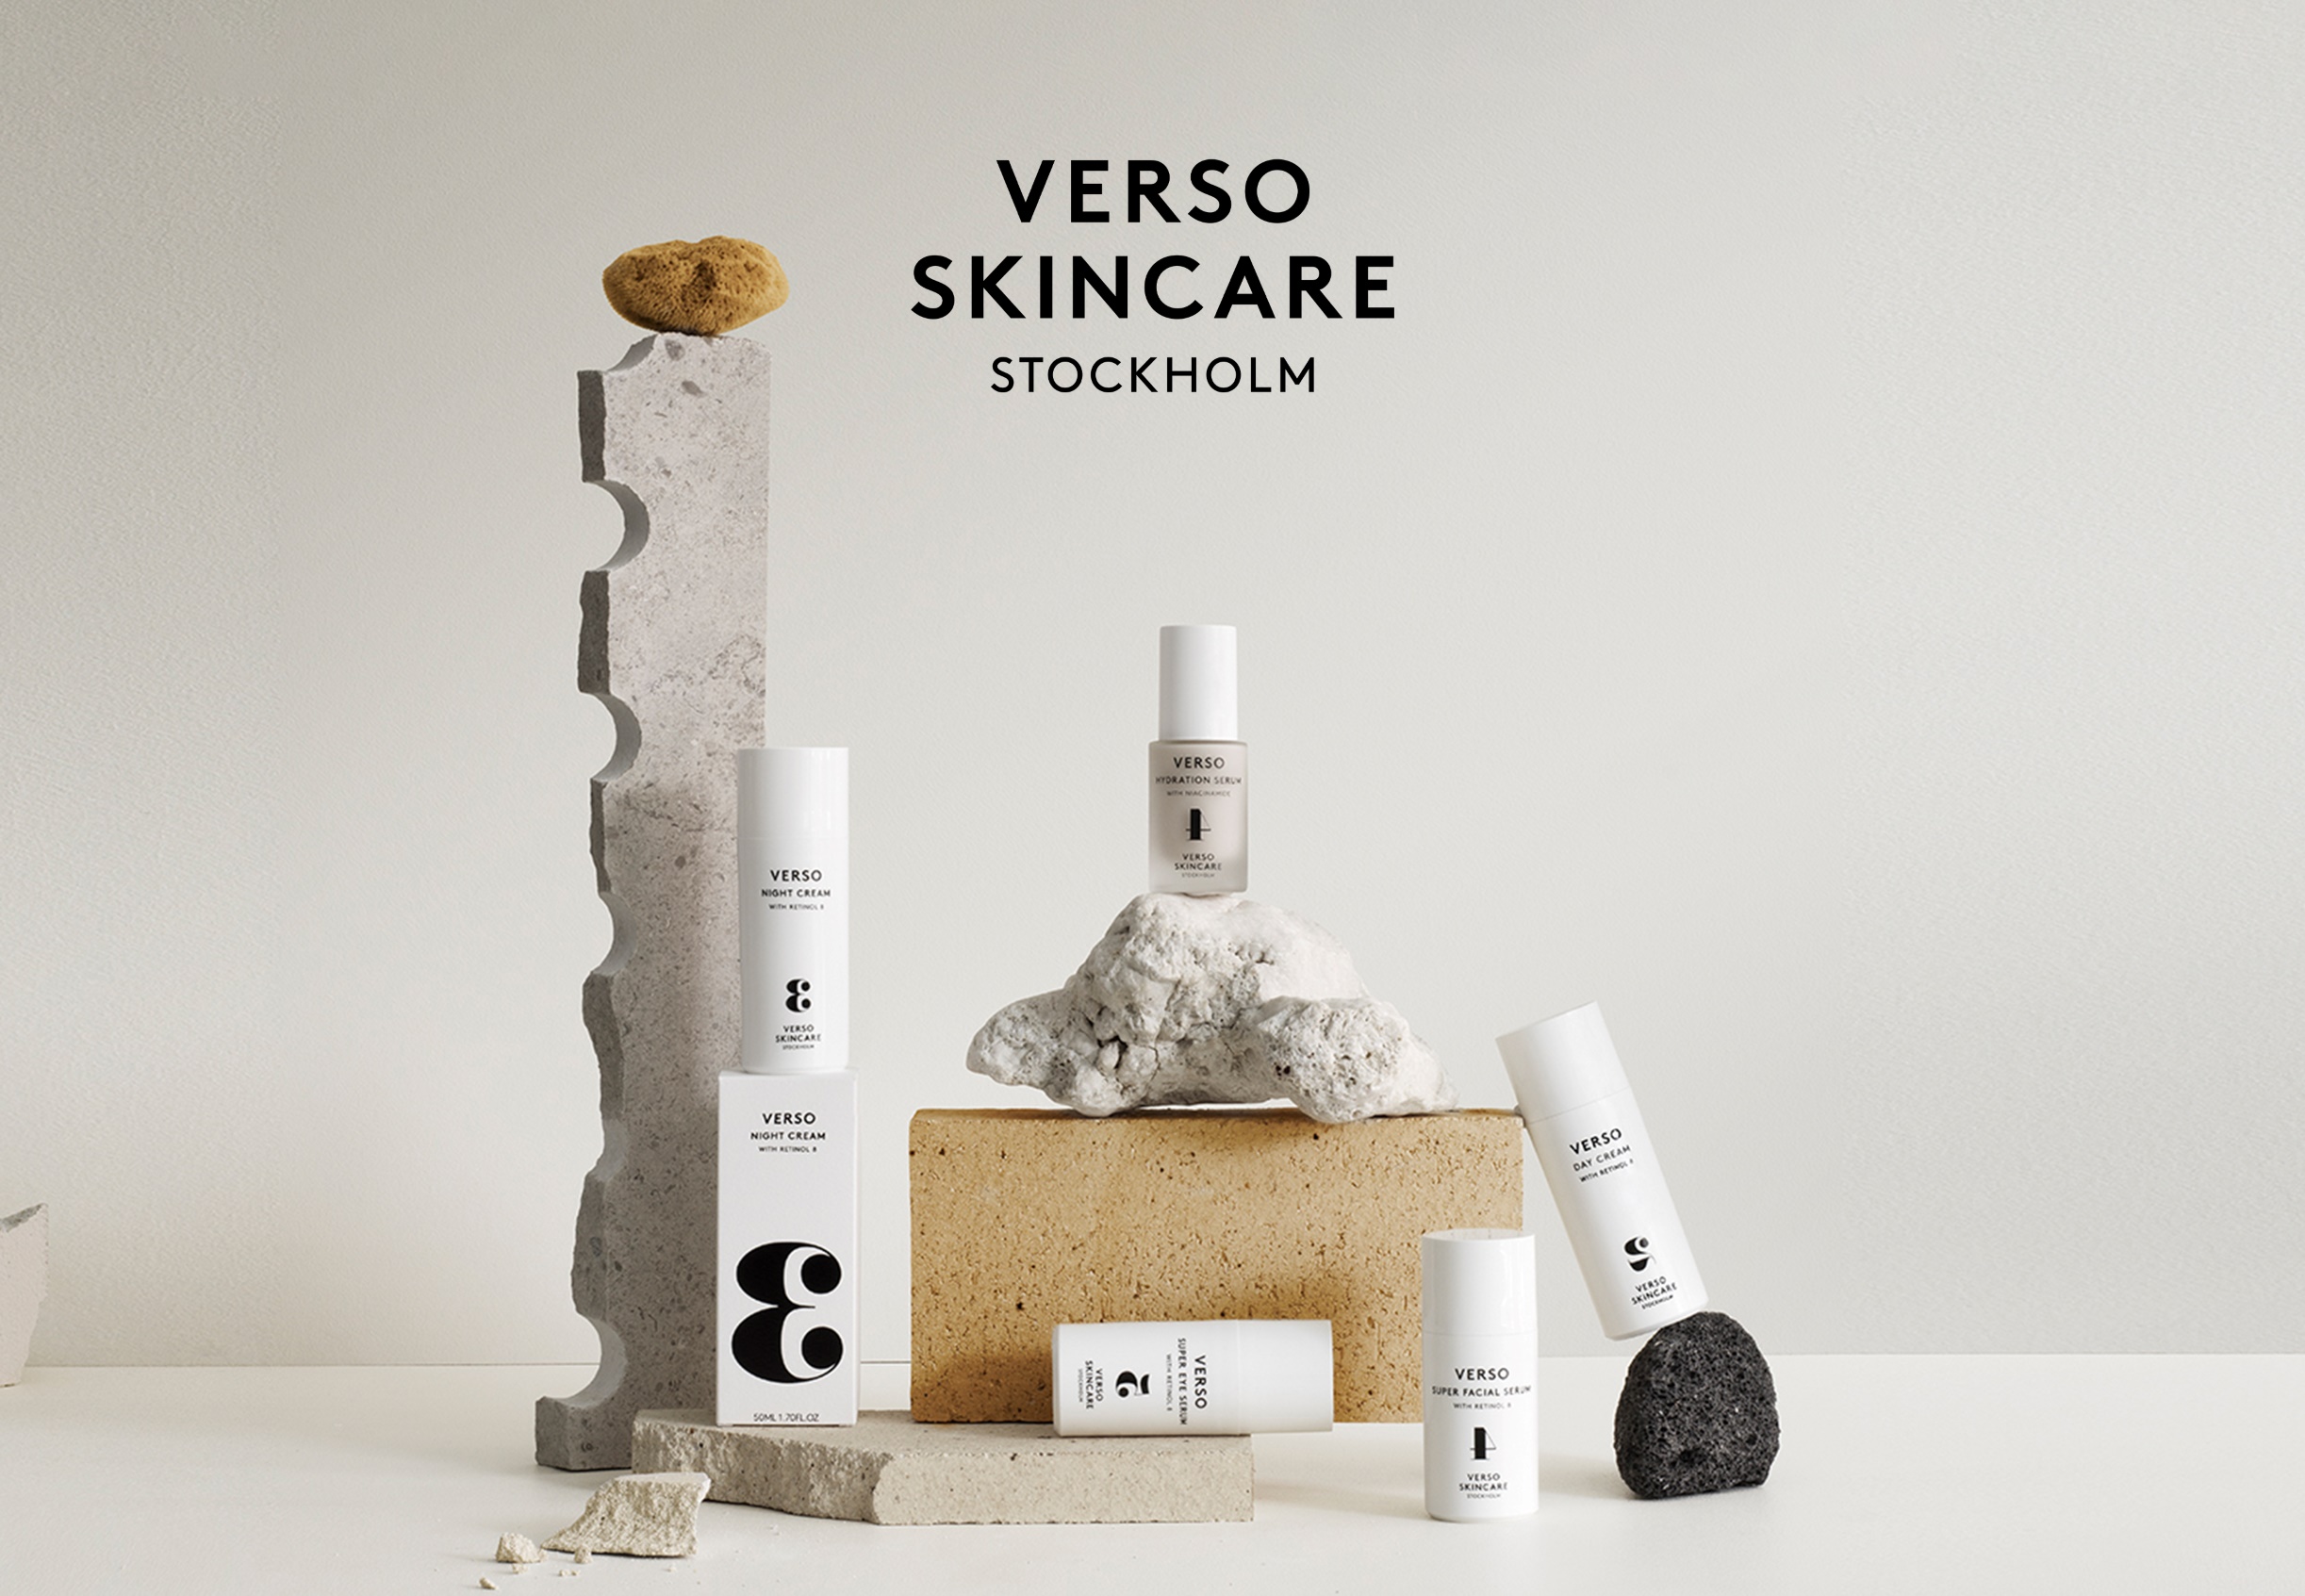 Photo of Verso brand skincare products.